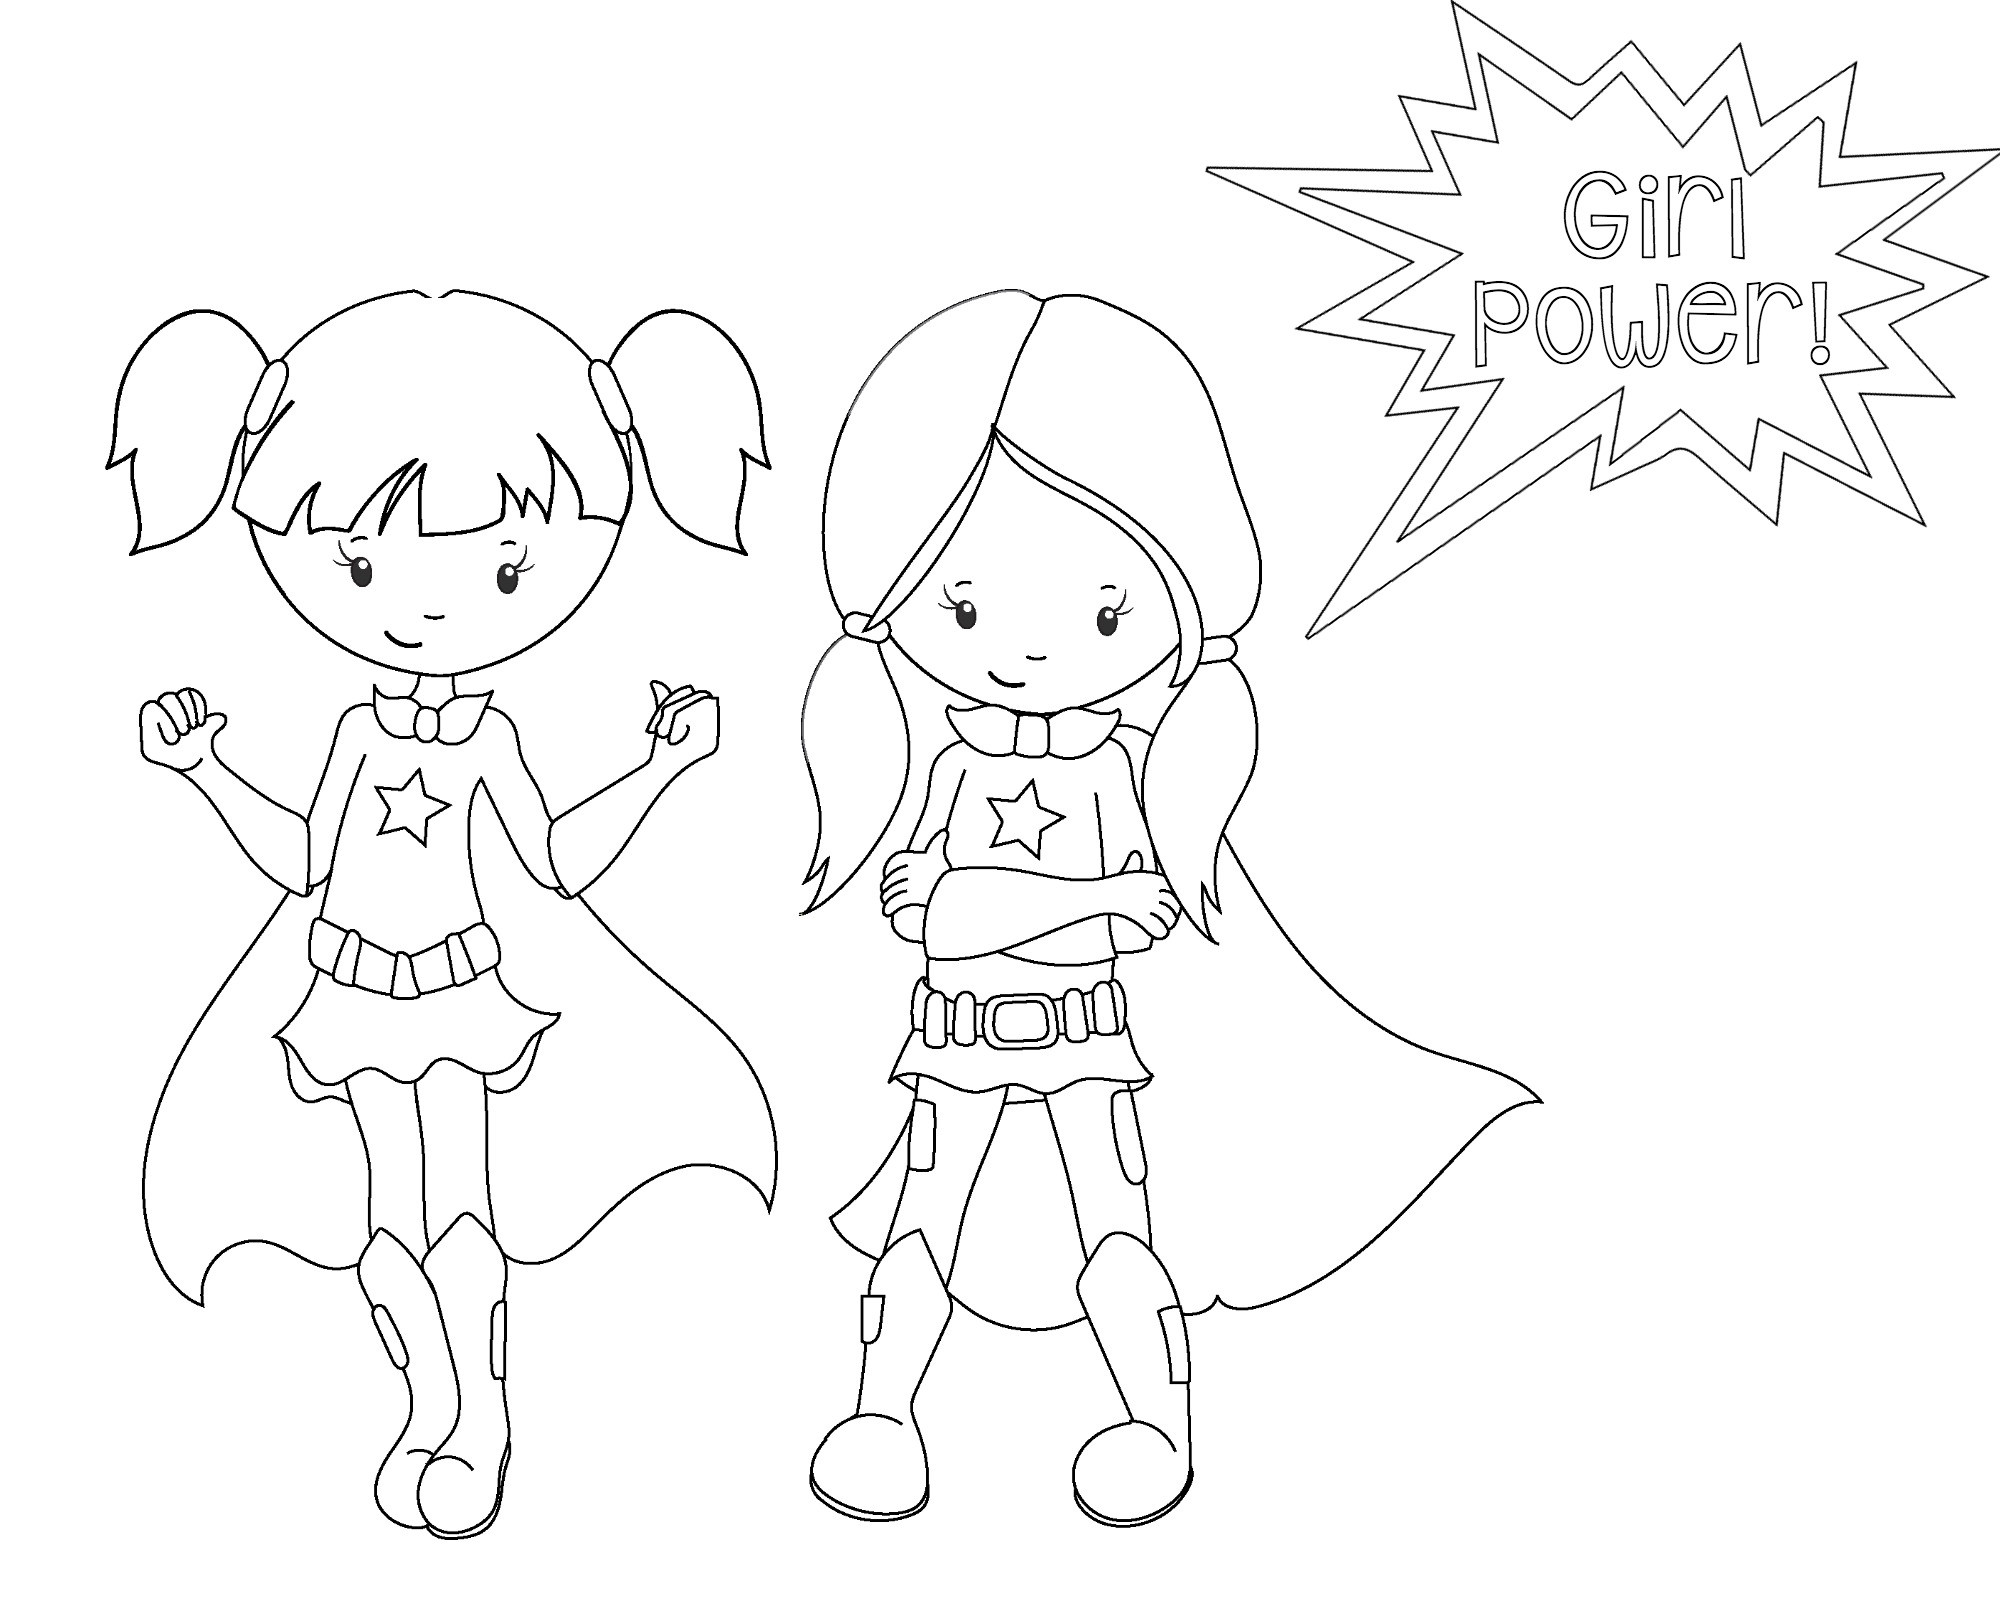 Girl Superhero Coloring Pages Free
 Superhero Coloring Pages Crazy Little Projects